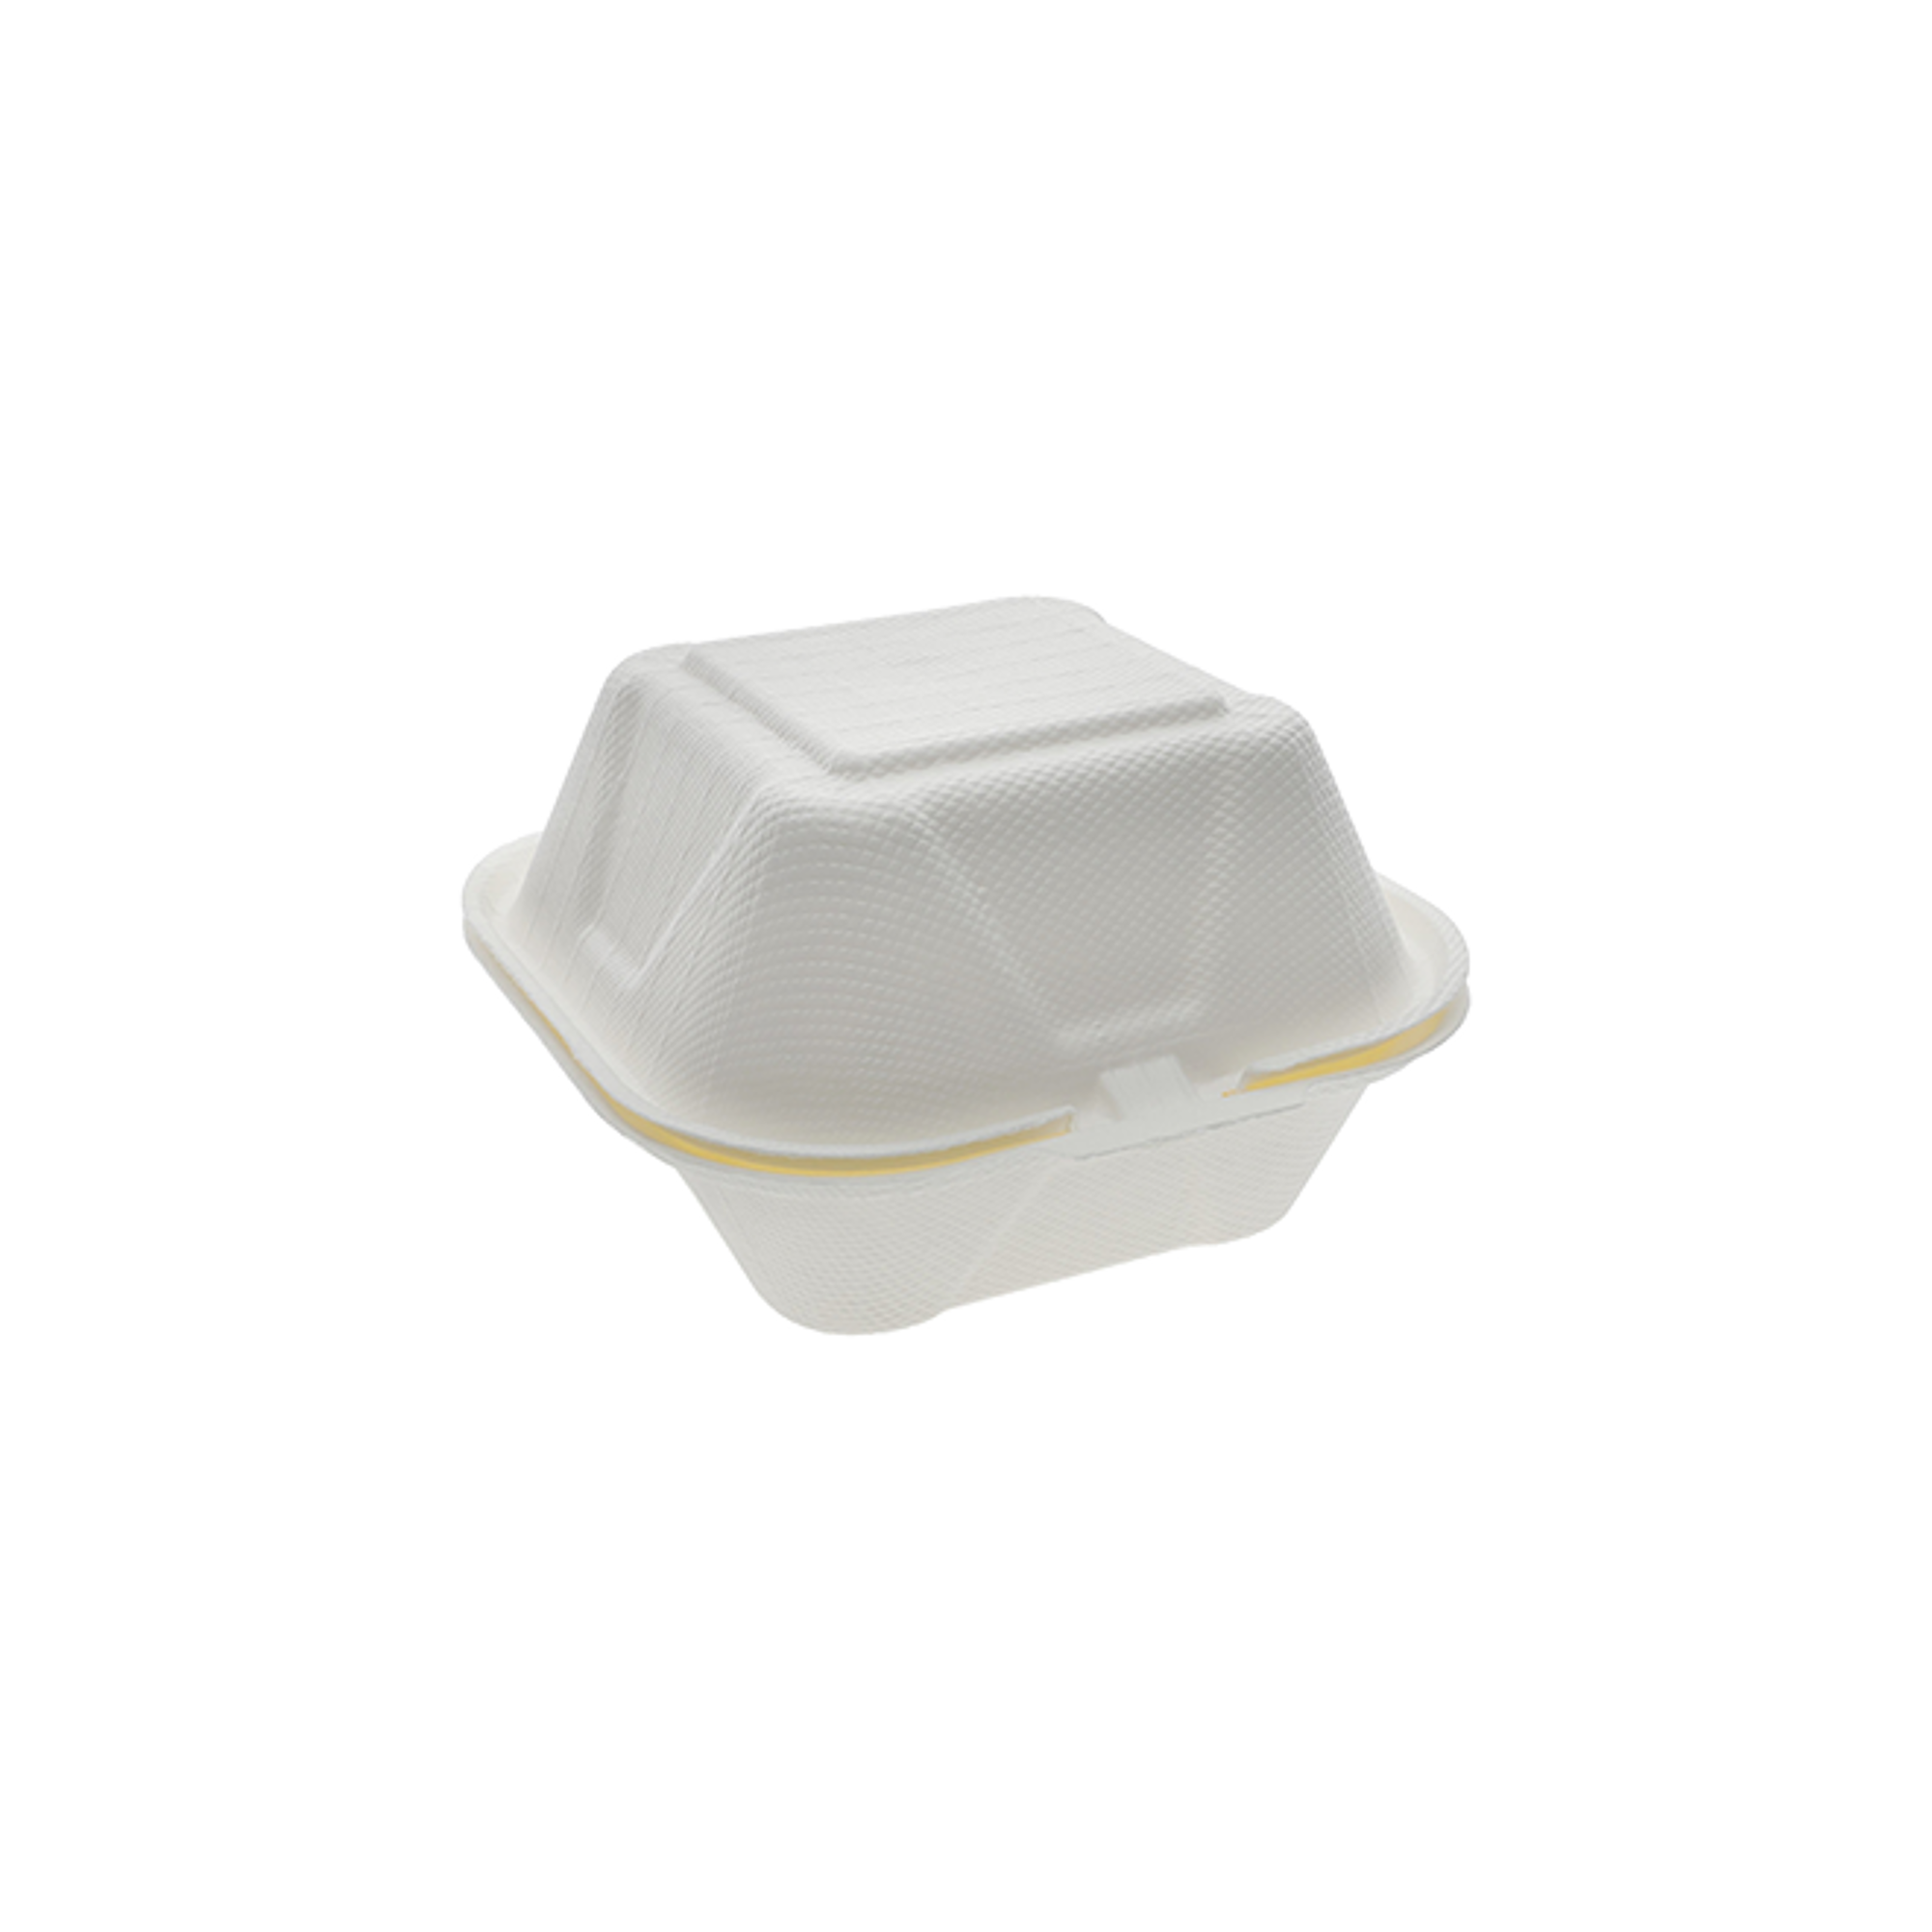 Molded Fiber NPFA Small Hinged Lid Containers 6 x 6 x 3.19, 4